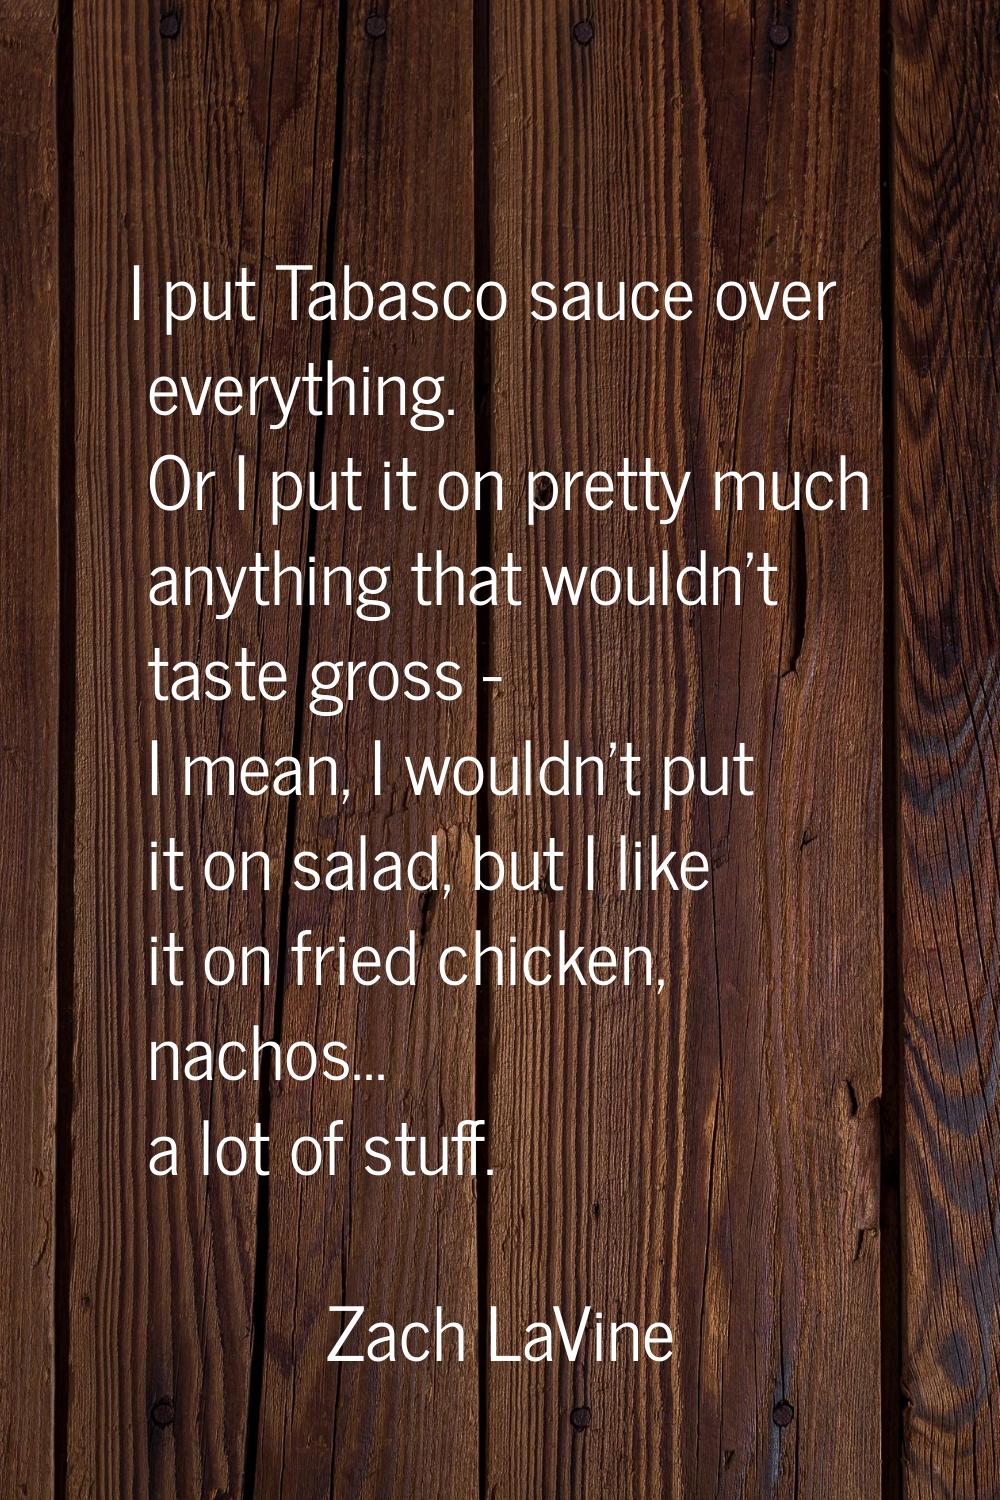 I put Tabasco sauce over everything. Or I put it on pretty much anything that wouldn't taste gross 